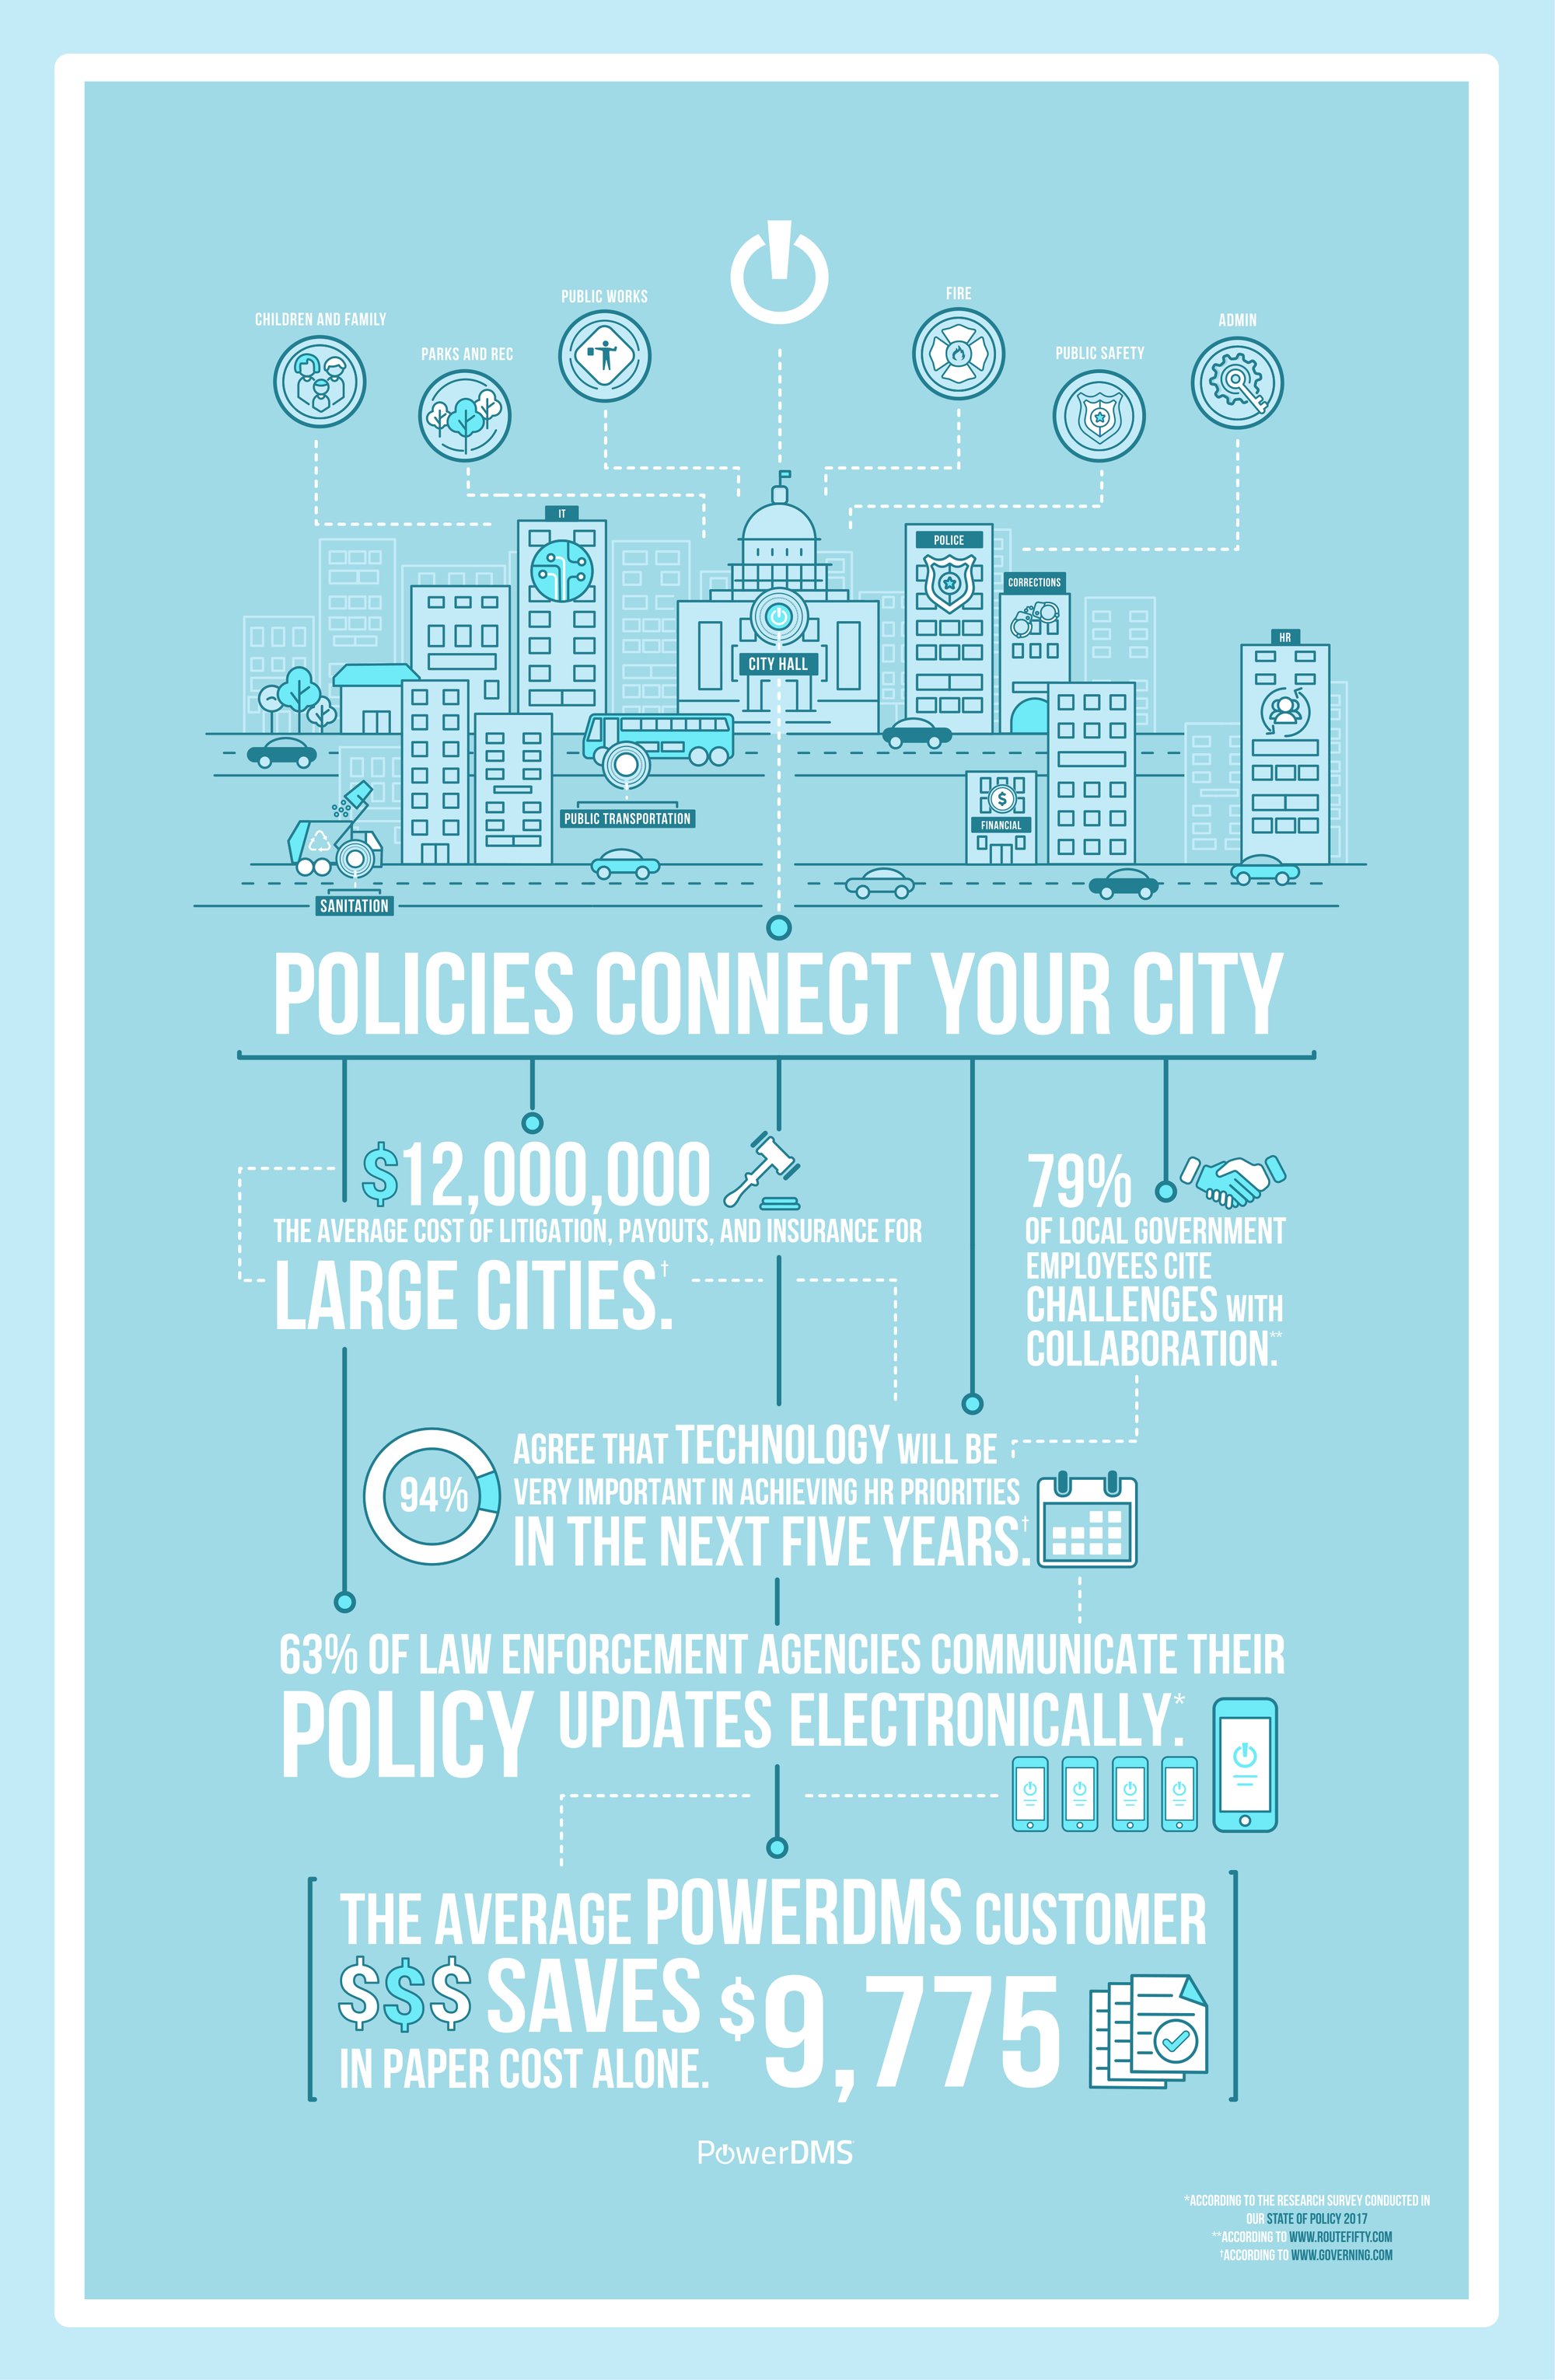 powerdms-policies-connect-your-city-infographic